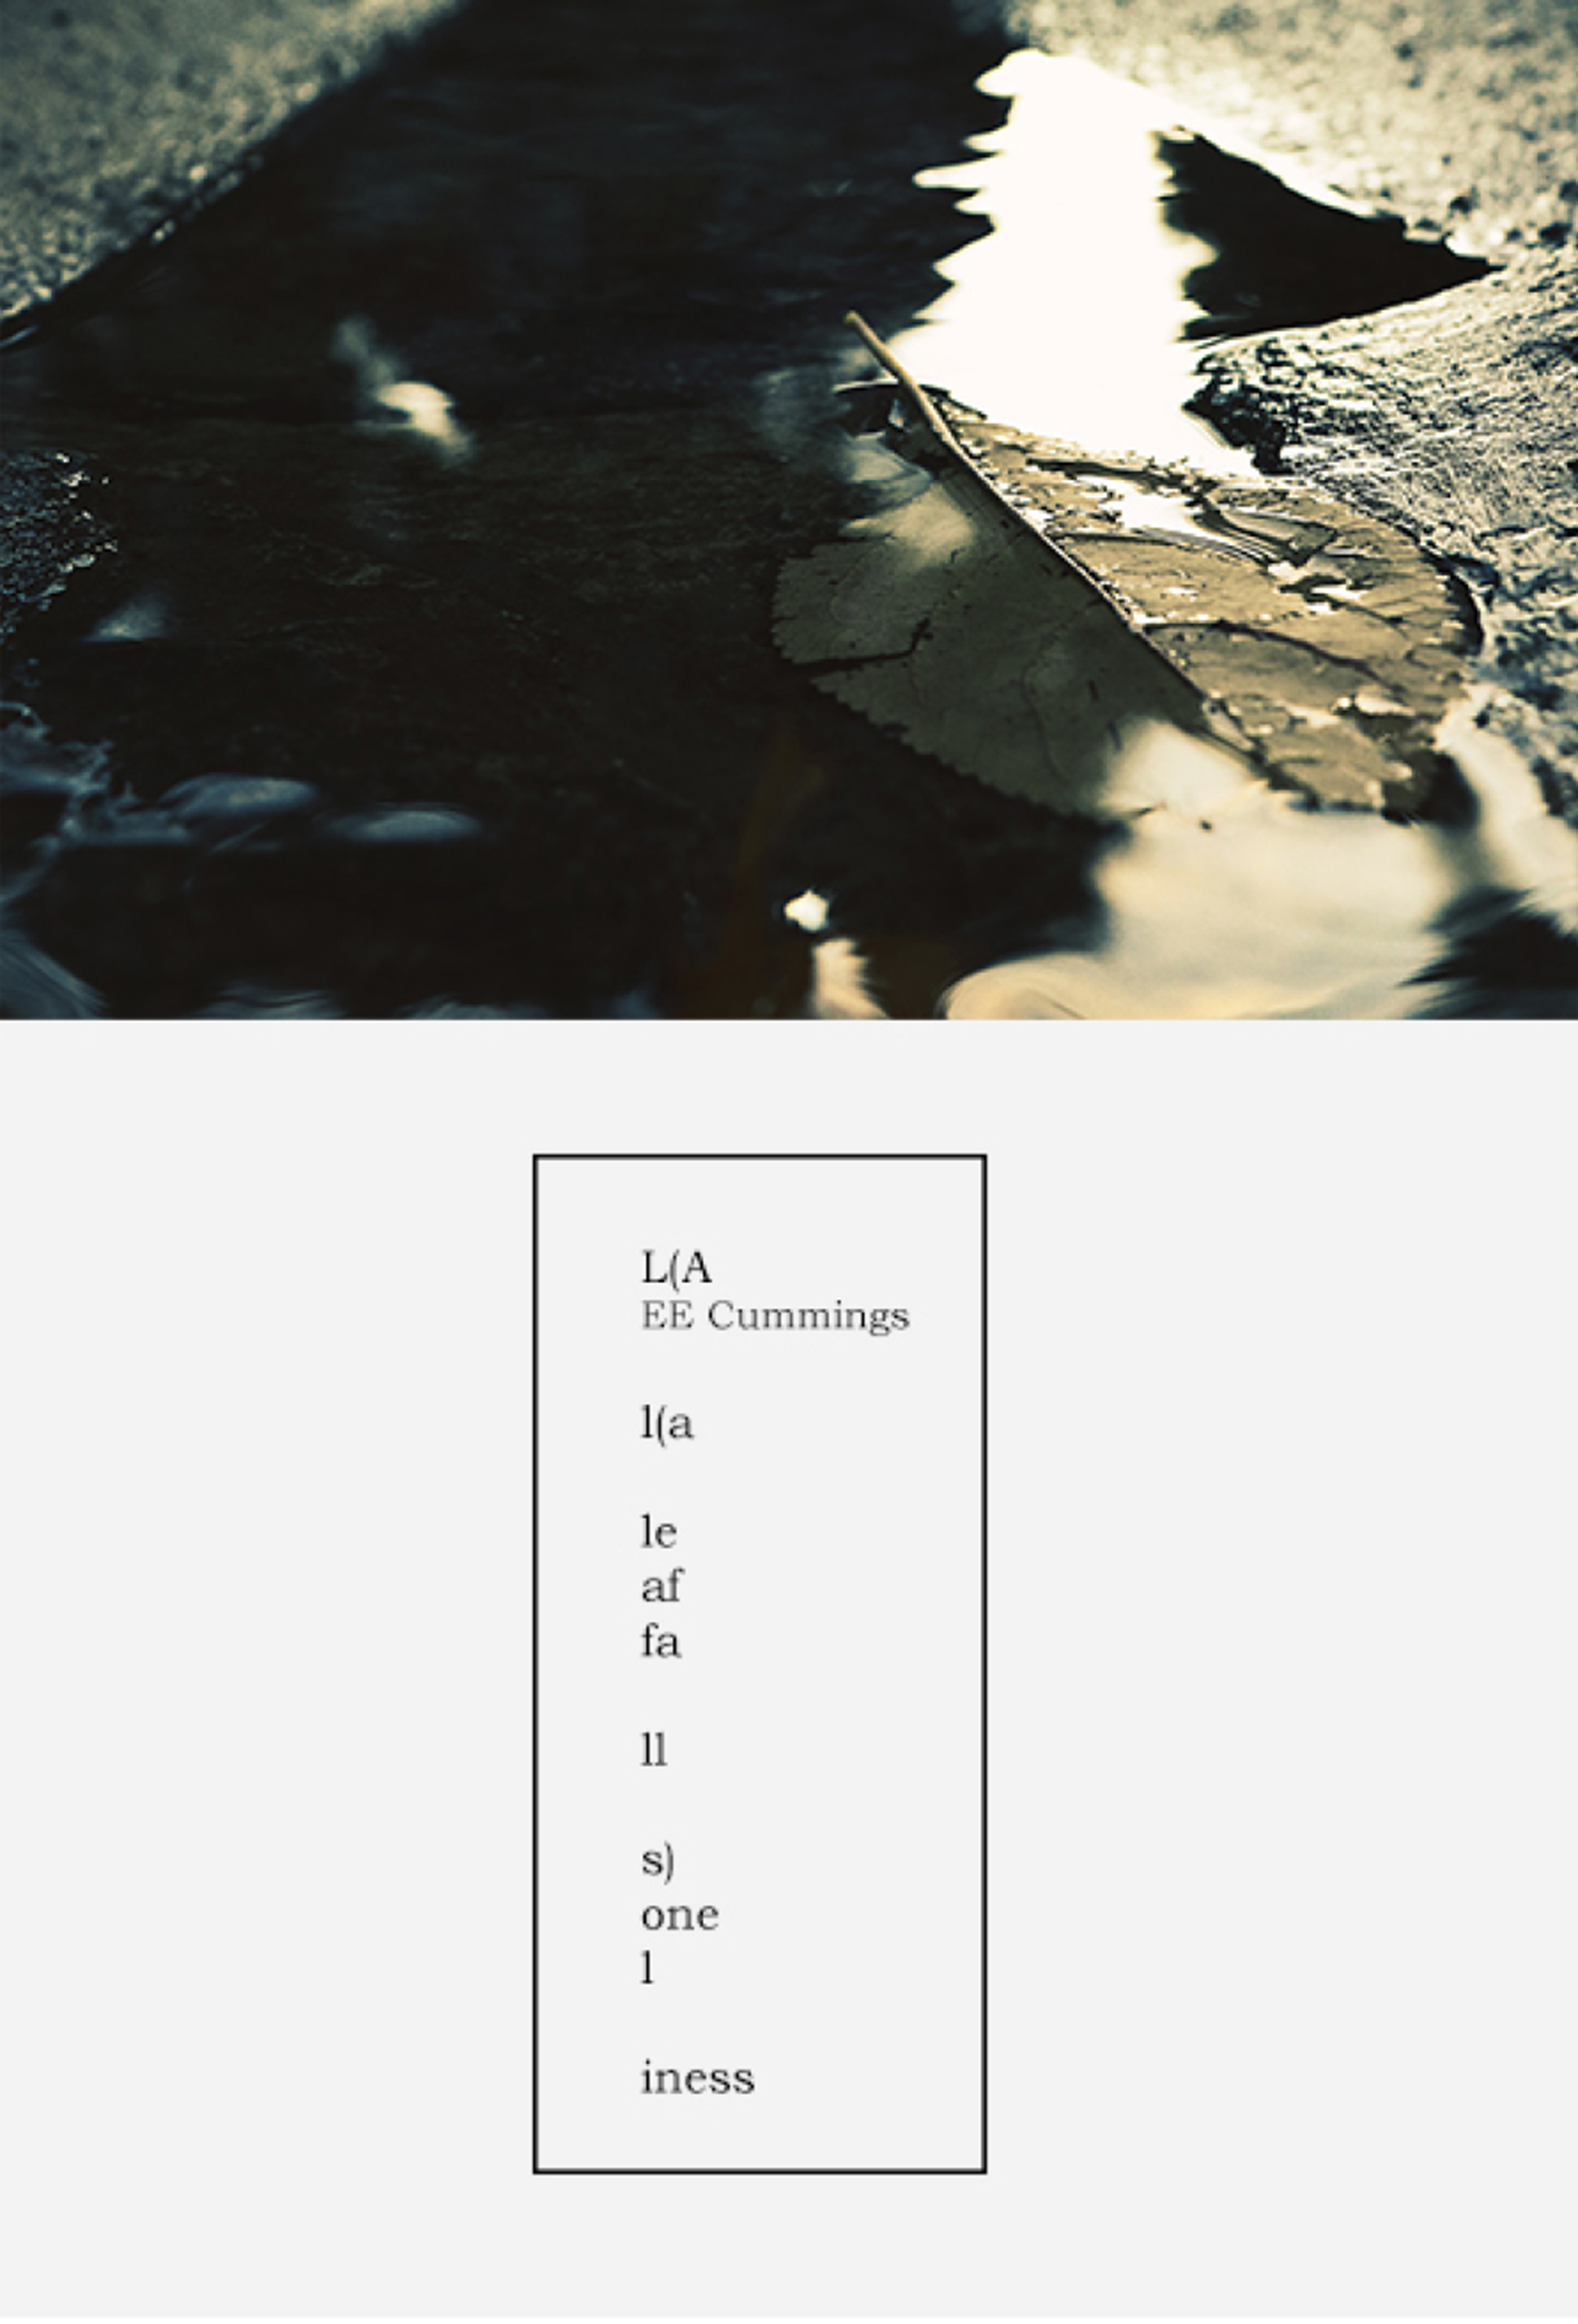 Photograph of a leaf in a small pool of water on asphalt, placed above a written poem